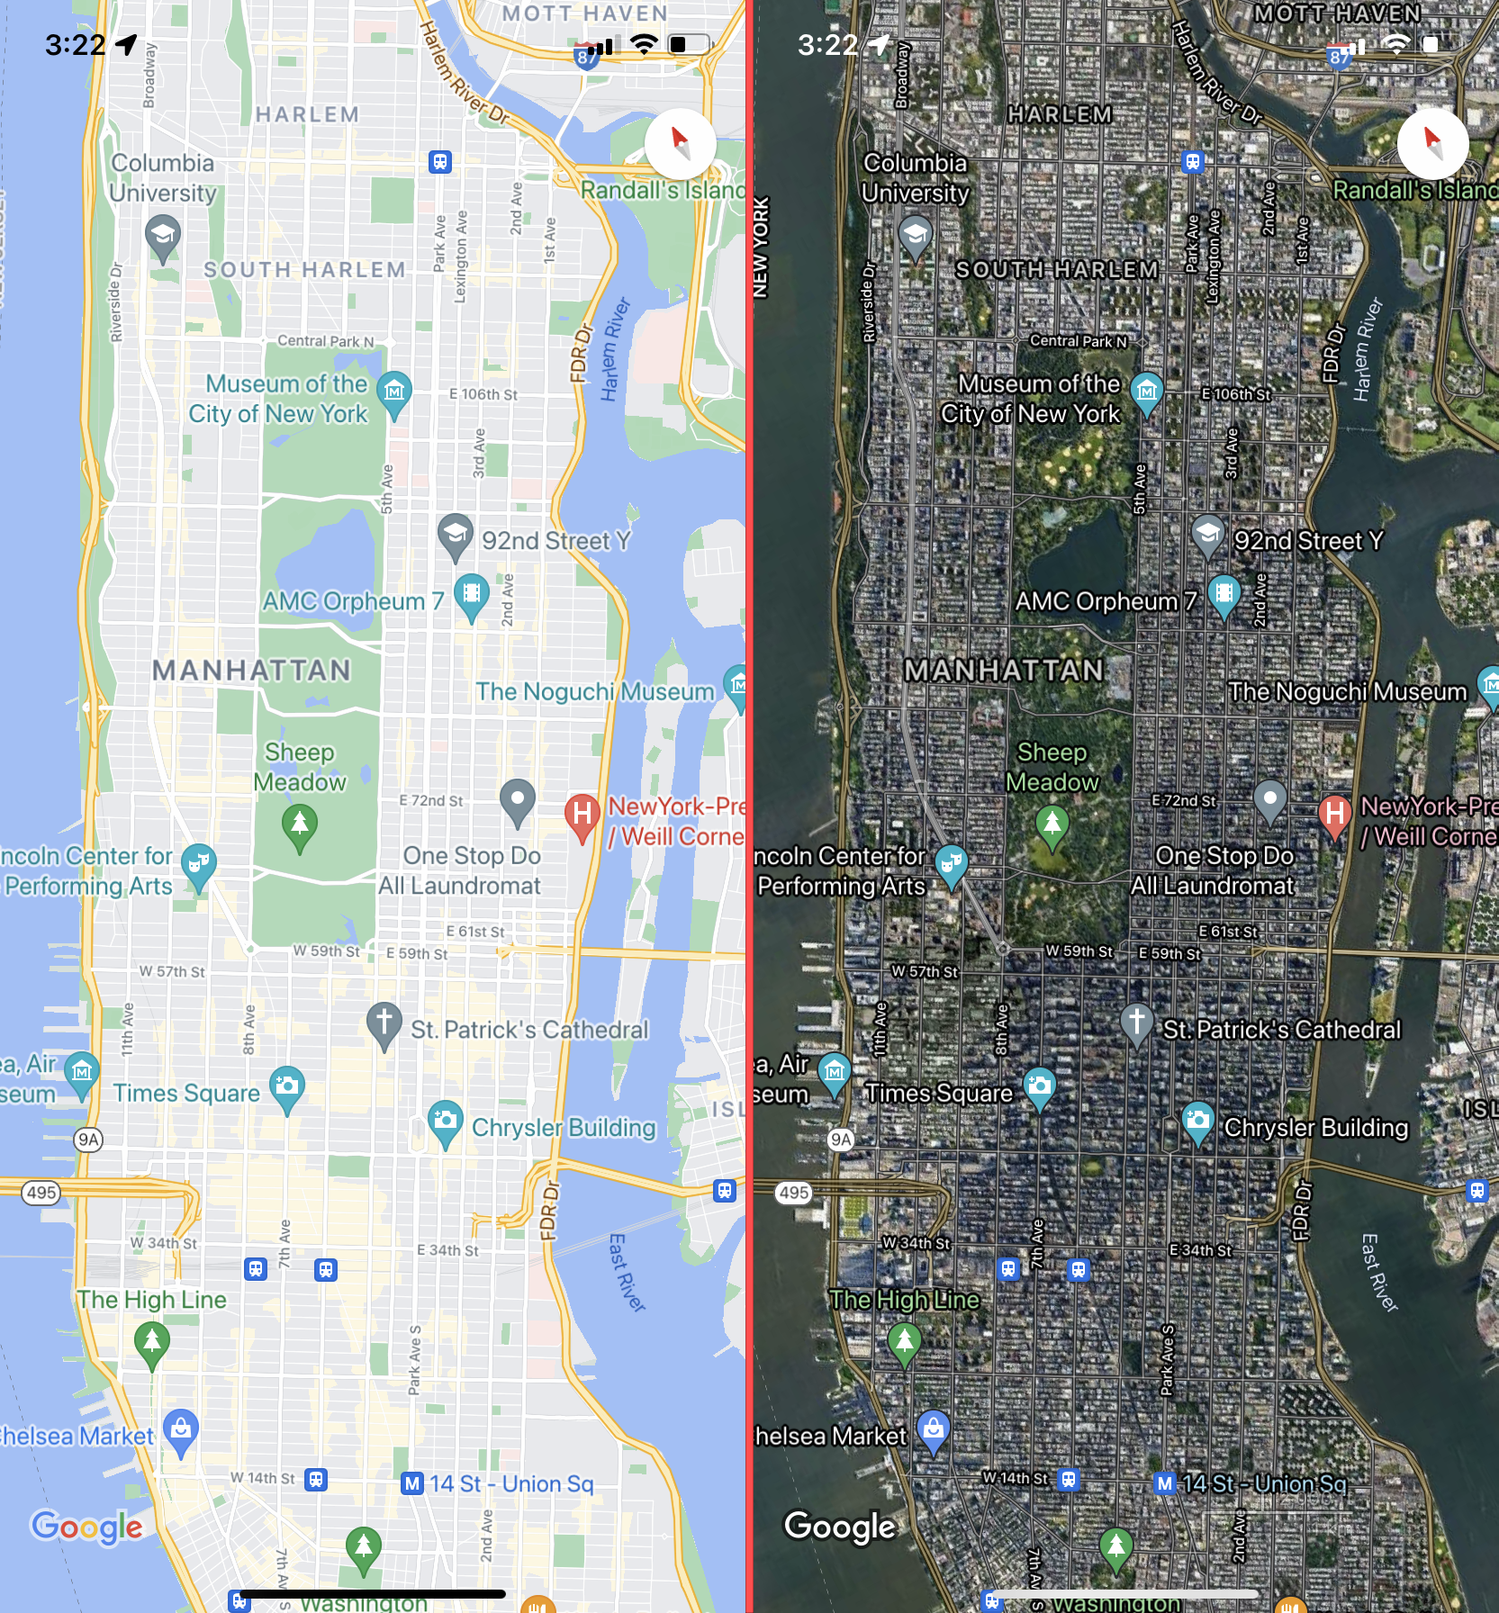 A map of Manhattan, shown in both satellite and non-satellite views.